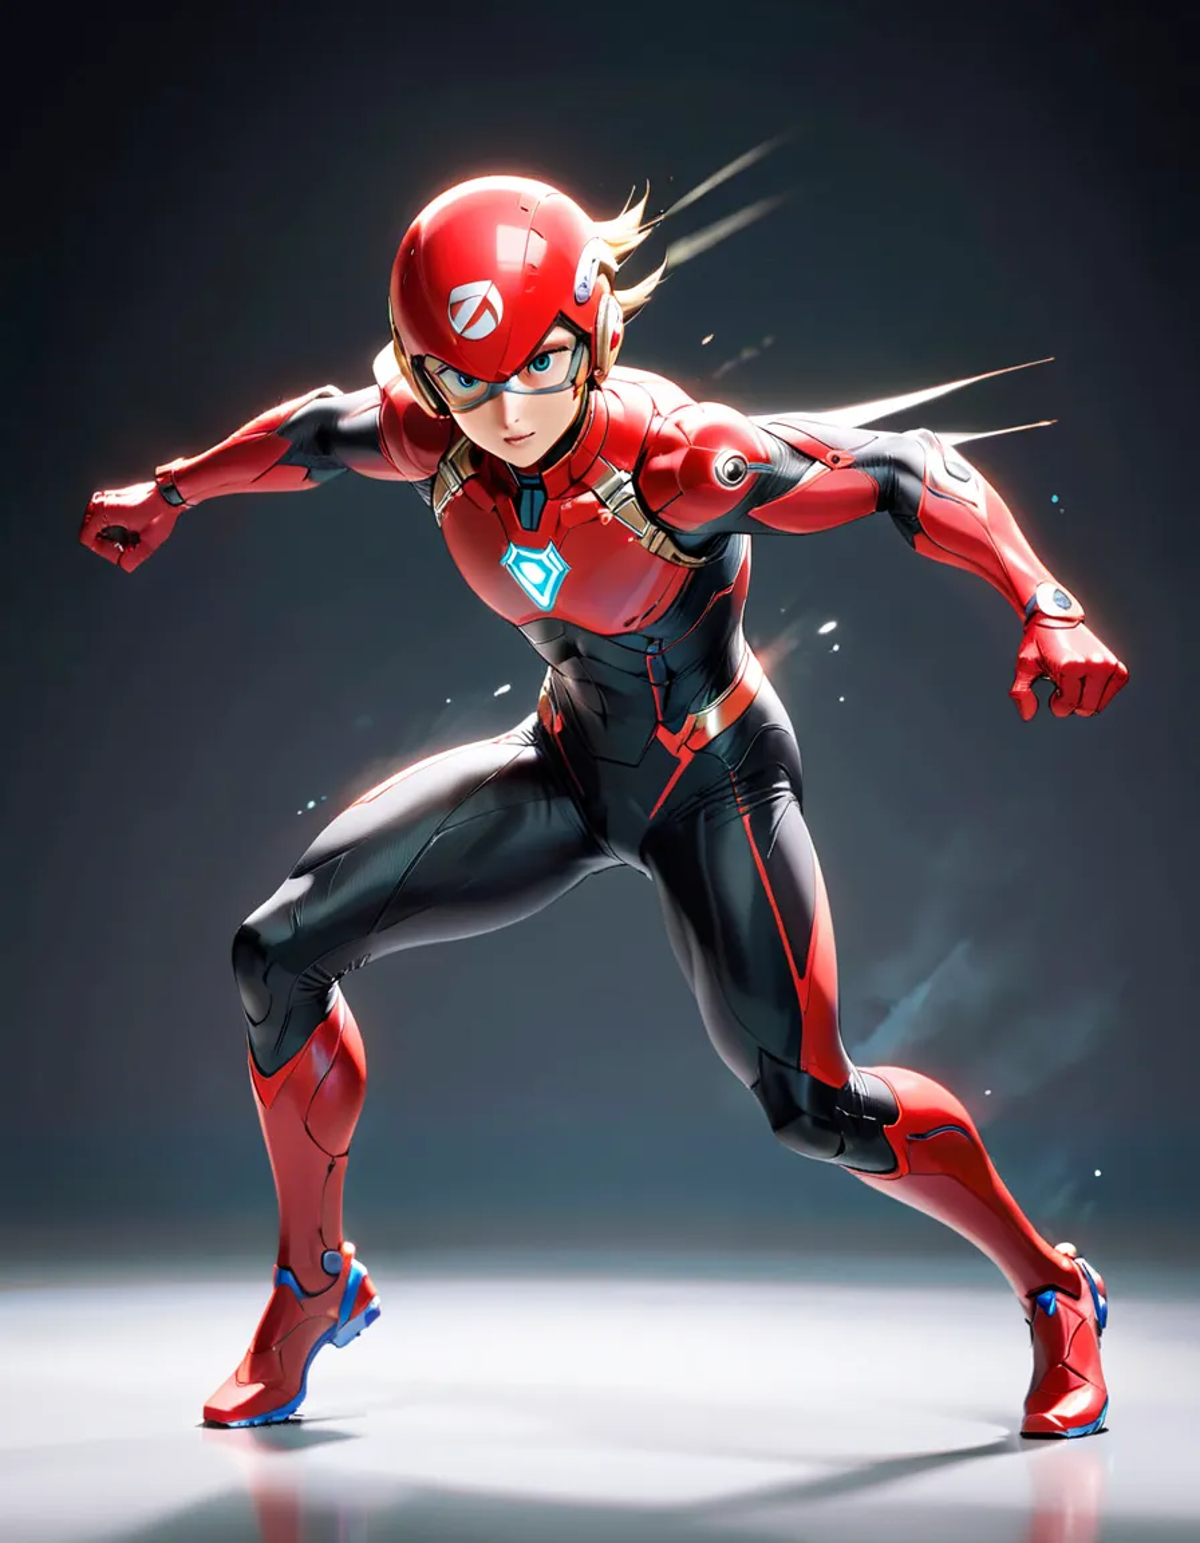 Speed Dash: Leaning forward with arms back, as if dashing at high speed.